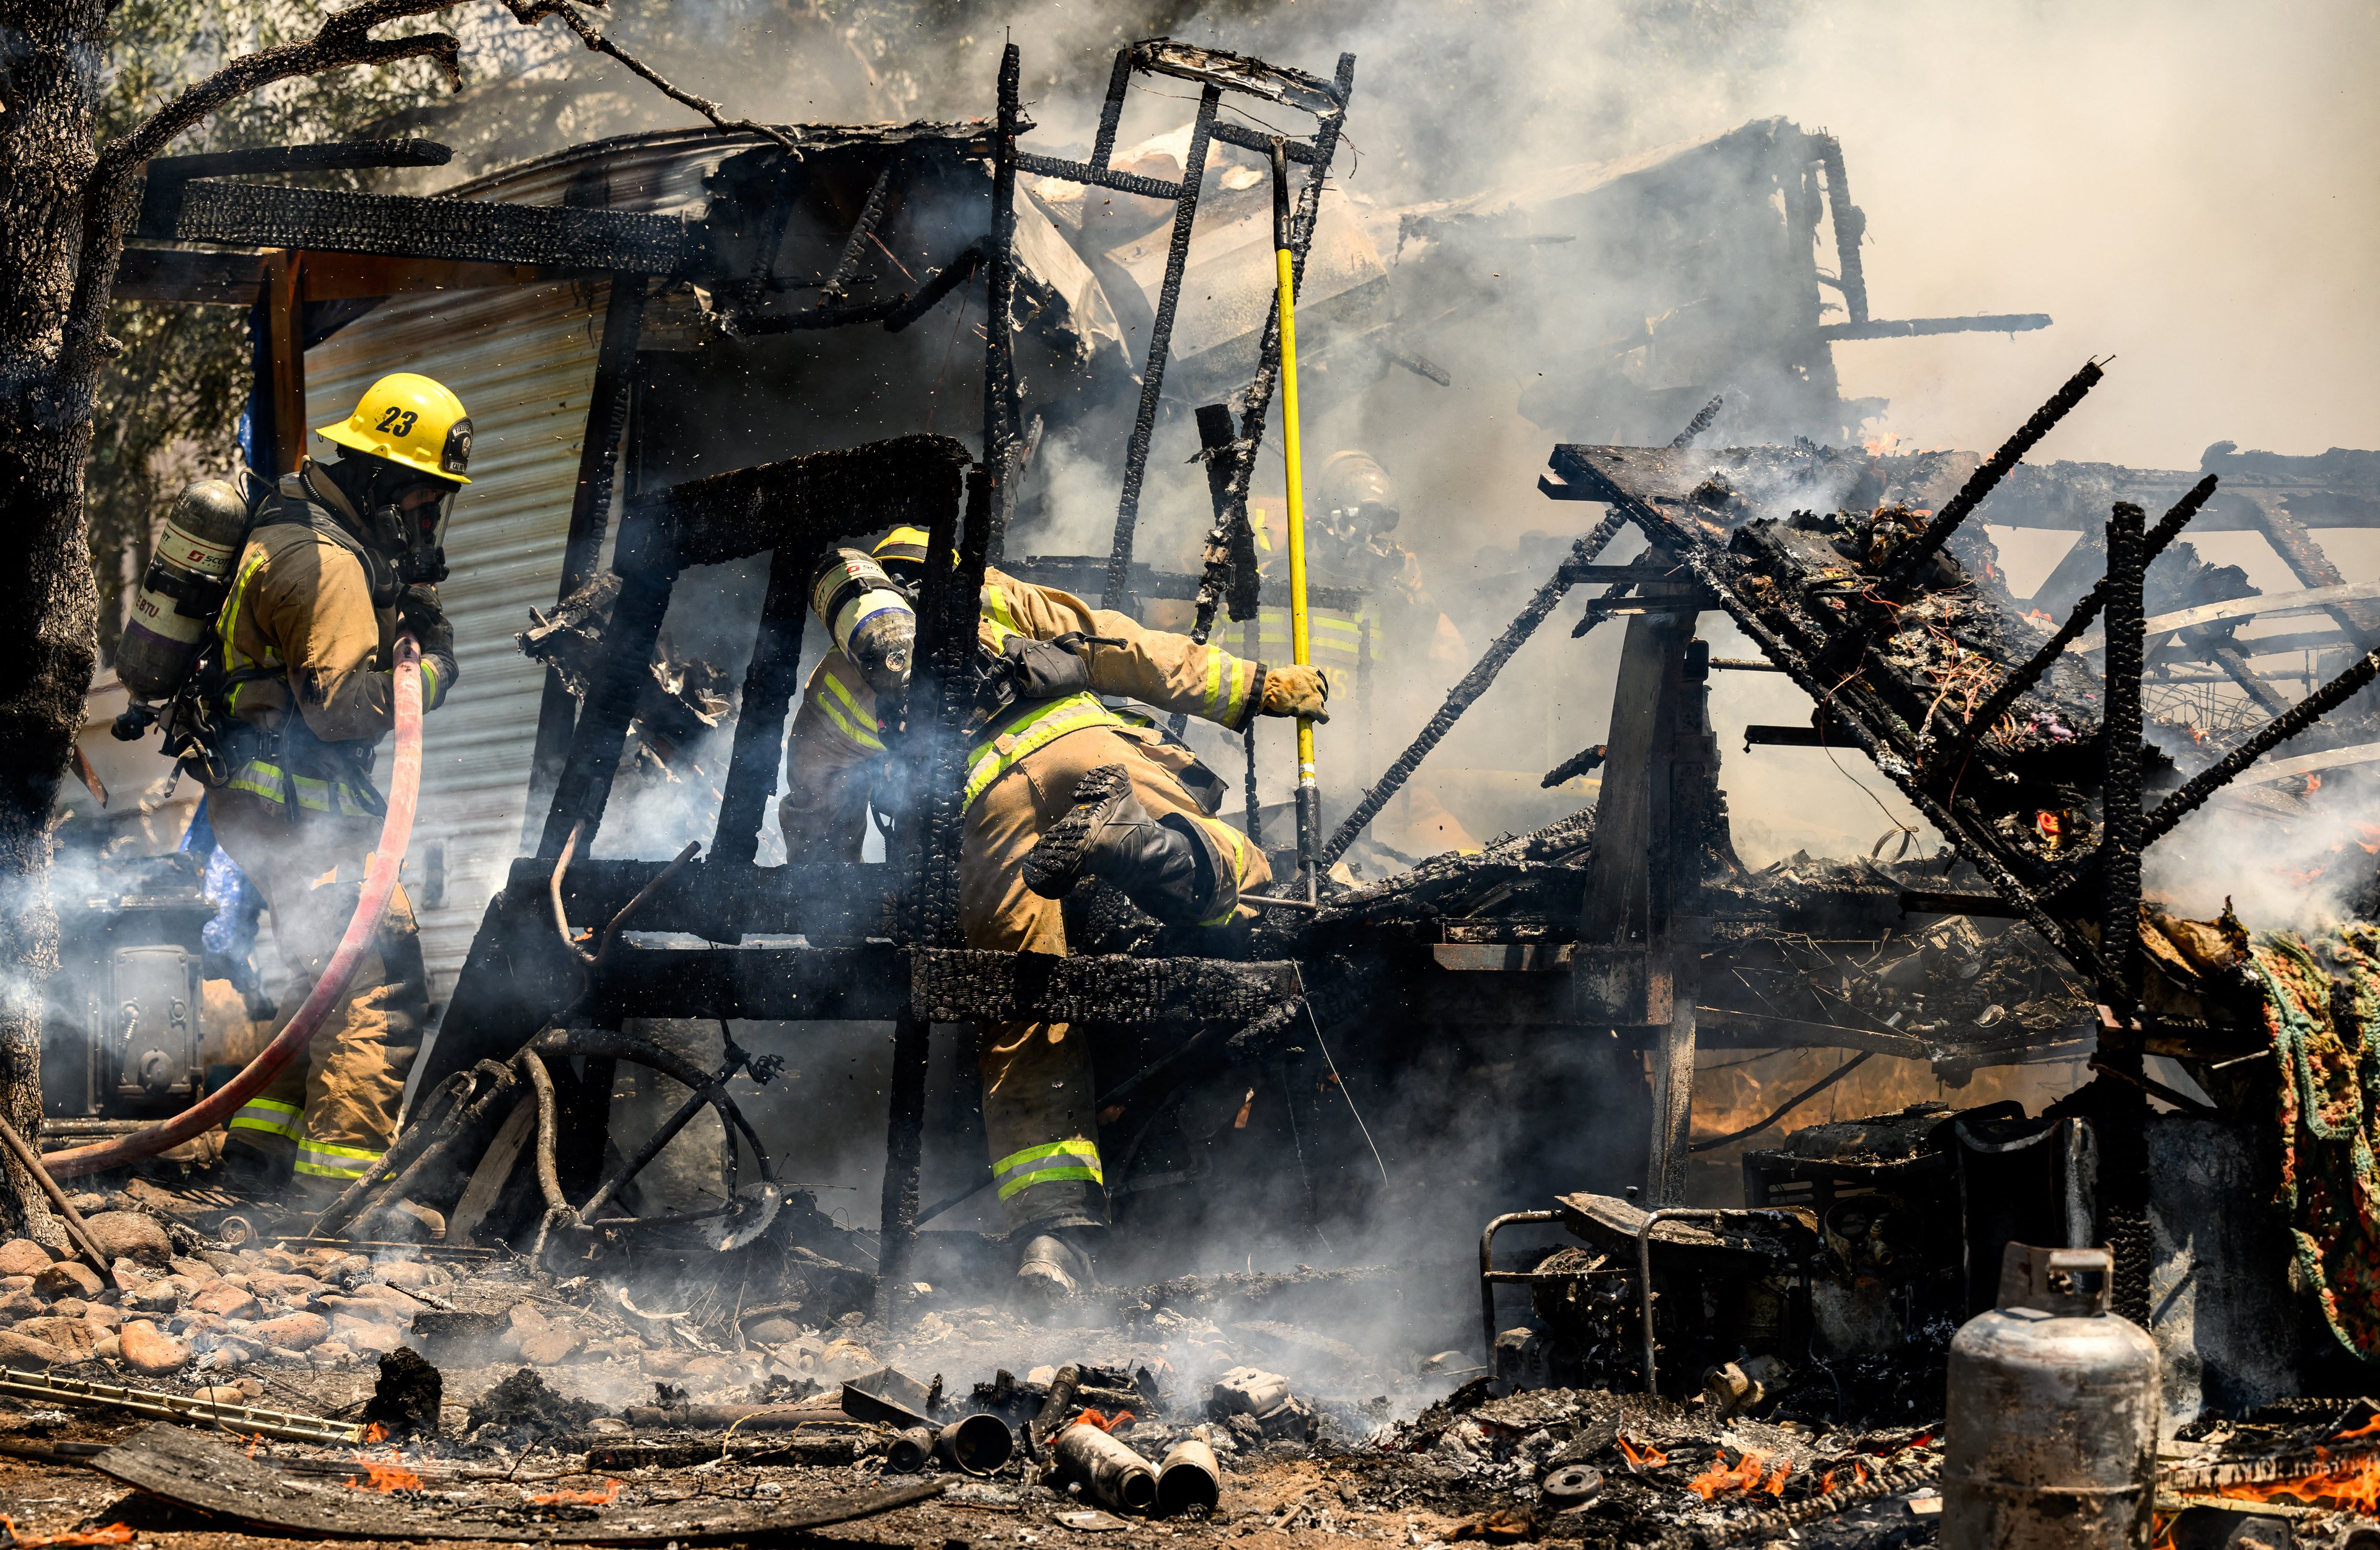 Firefighters knock down a structure fire that ignited from a burning generator and briefly spread to a small spot fire at a home in Oroville, California on July 03, 2024. A heatwave is sending temperatures soaring resulting in red flag fire warnings throughout the state. (Photo by JOSH EDELSON / AFP)